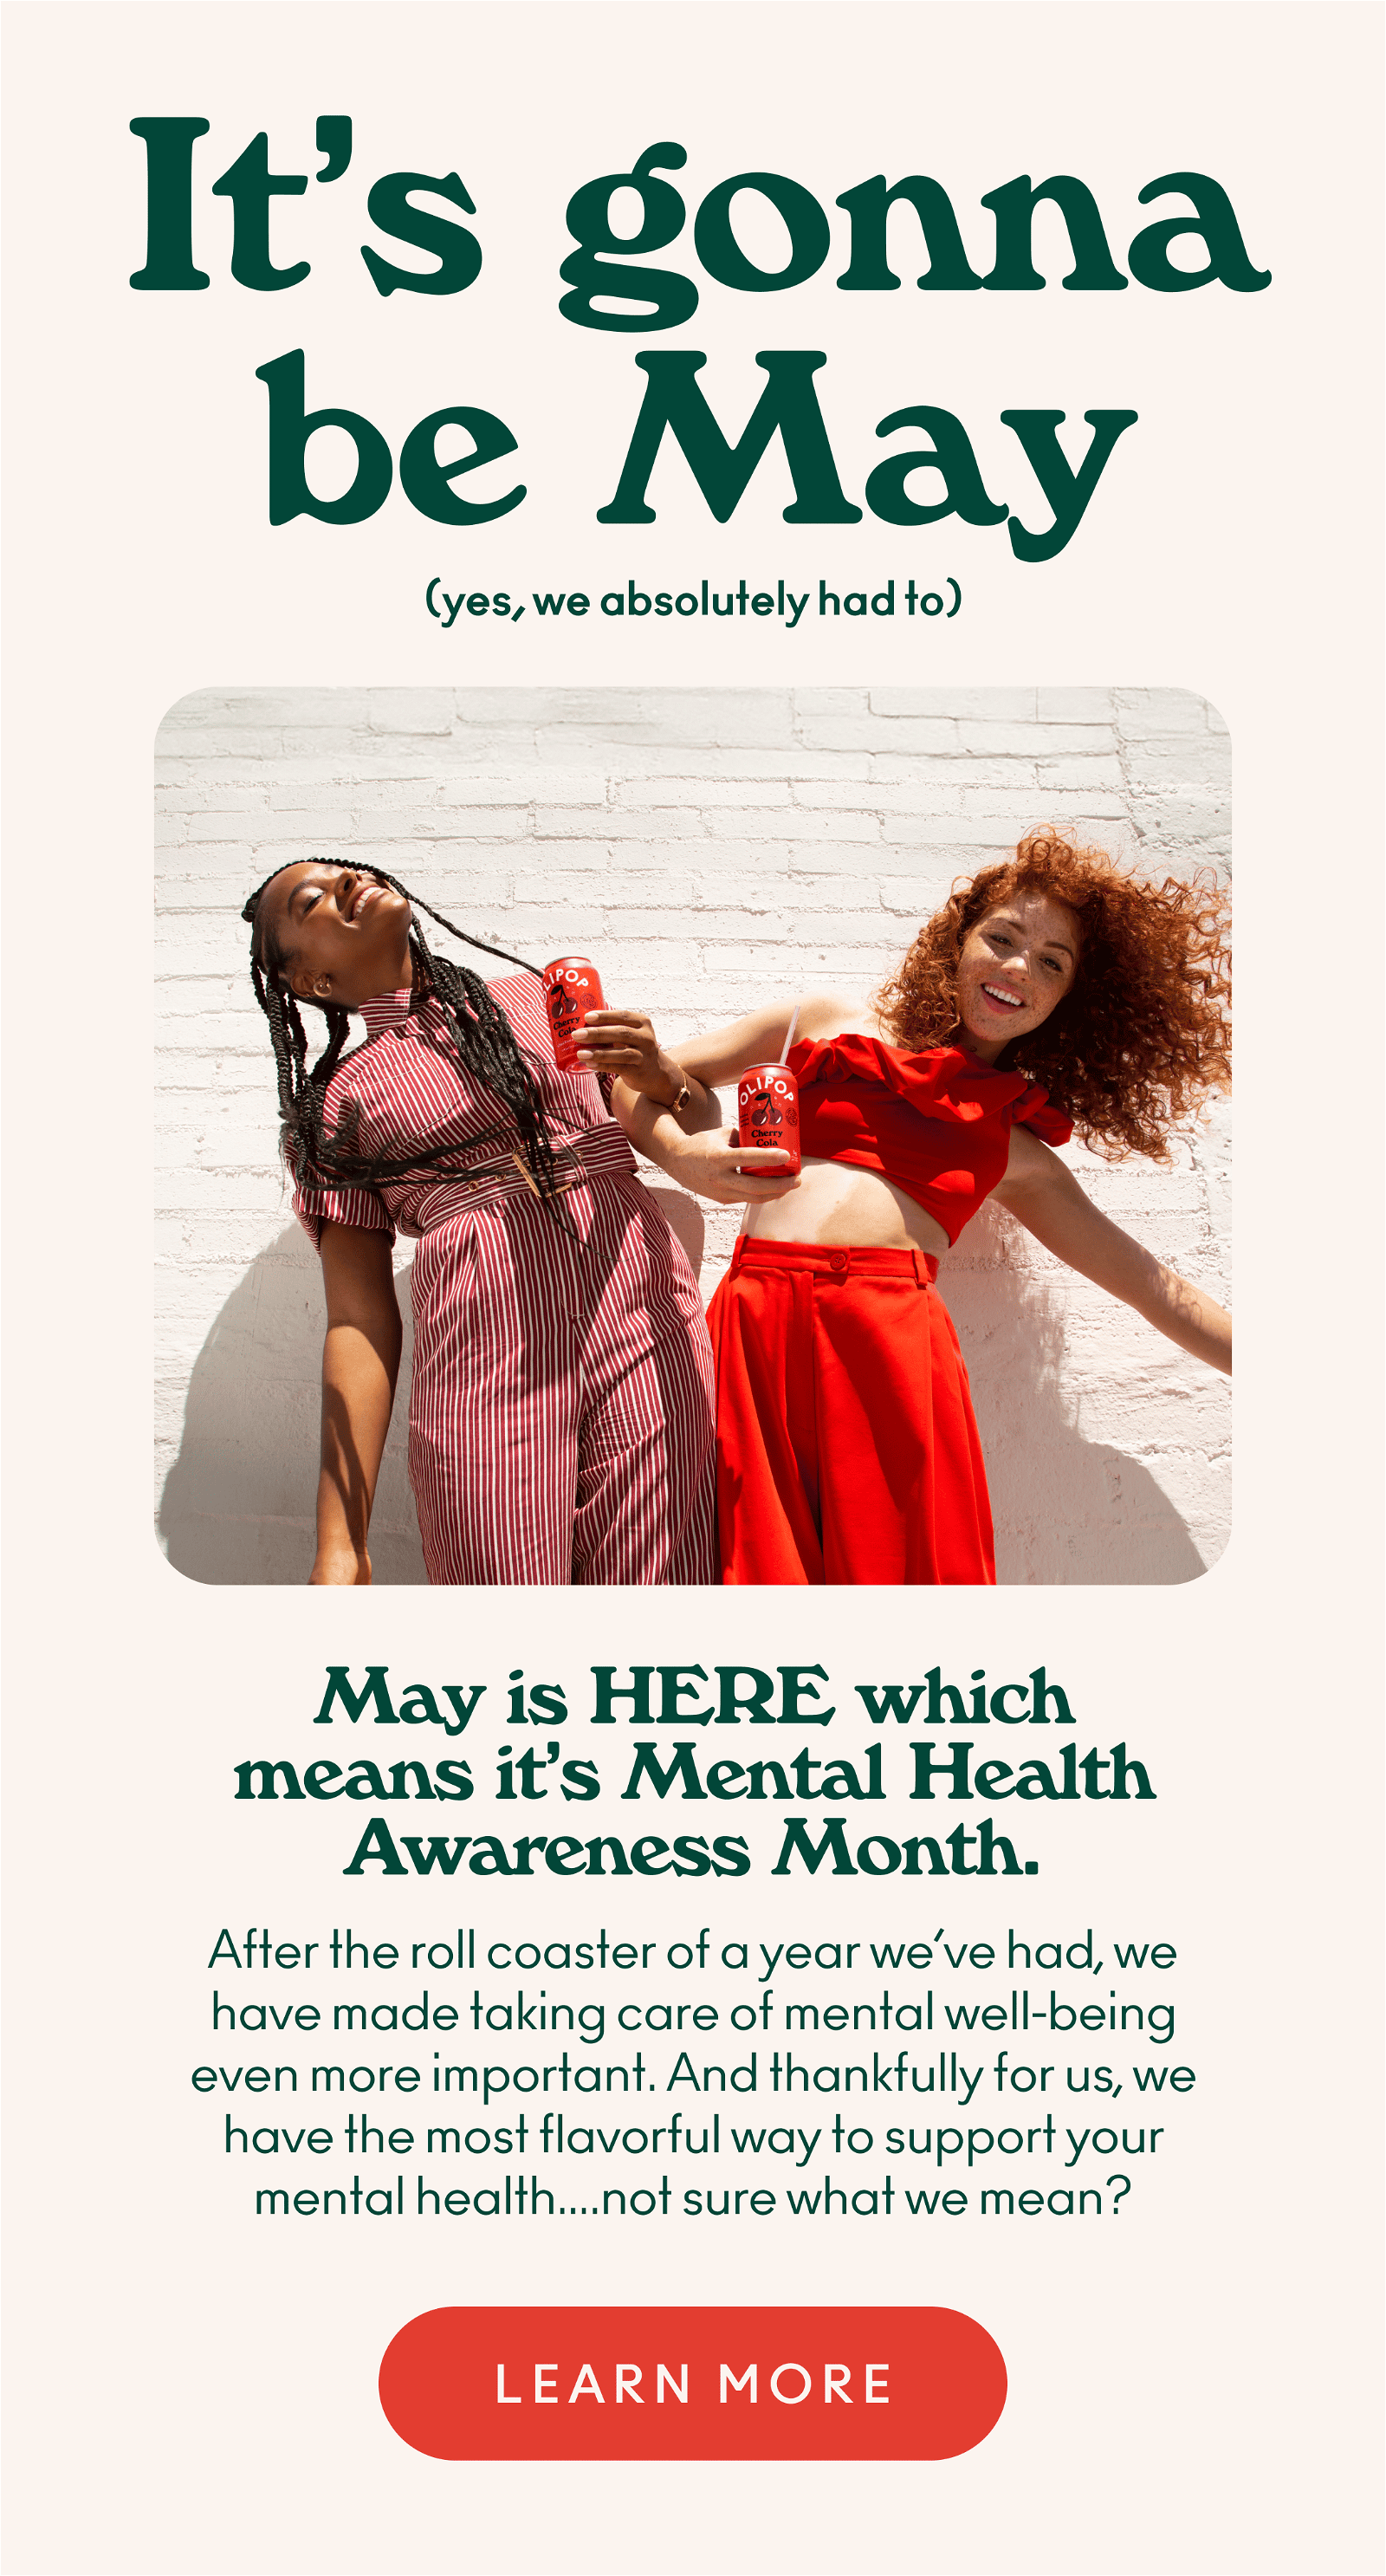 May is HERE which means it’s Mental Health Awareness Month. After the roll coaster of a year we’ve had, we have made taking care of mental well-being even more important. And thankfully for us, we have the most flavorful way to support your mental health….not sure what we mean?